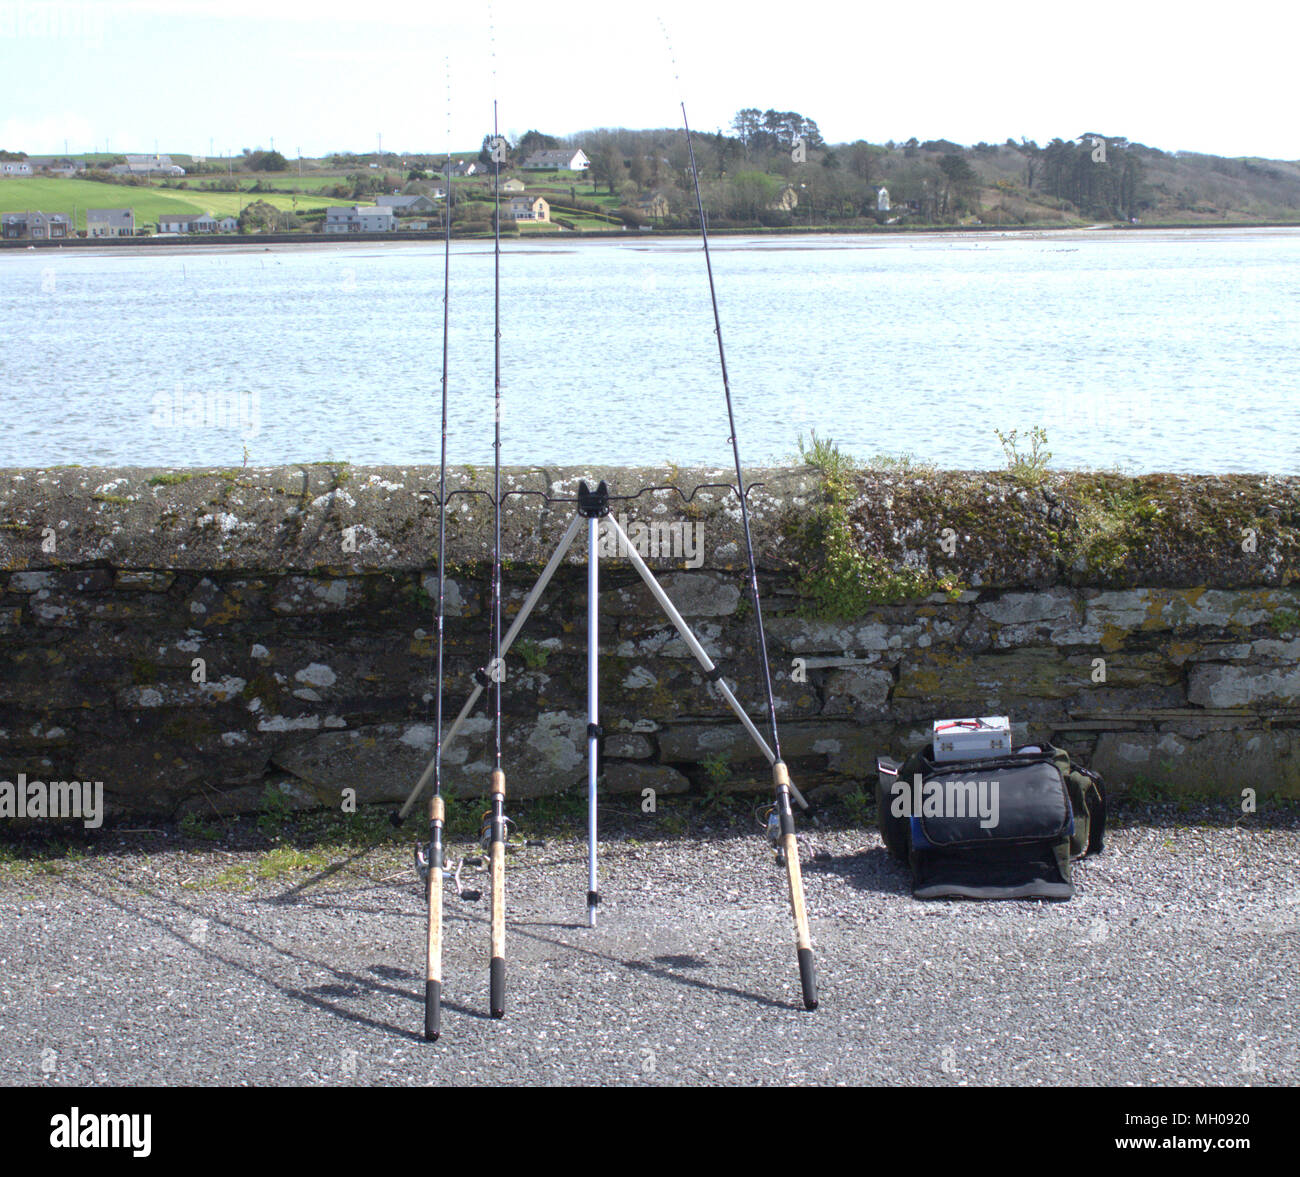 3 three fishing rods on a 4 rod rest sea fishing over a sea wall, on a bright spring morning with fishing tackle bag close by. Coastline Ireland Stock Photo